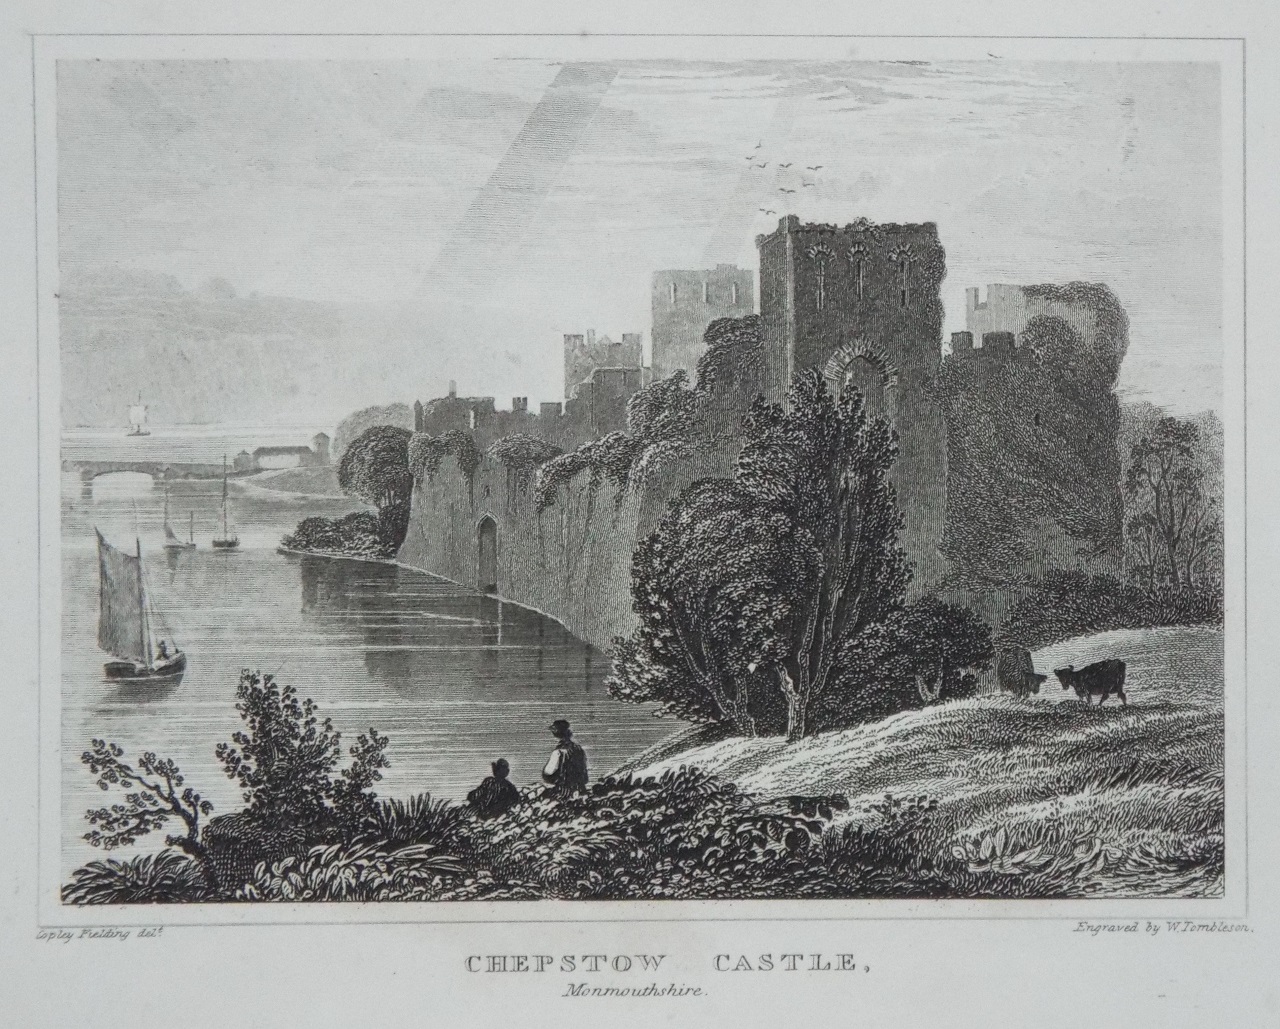 Print - Chepstow Castle, Monmouthshire. - Fielding